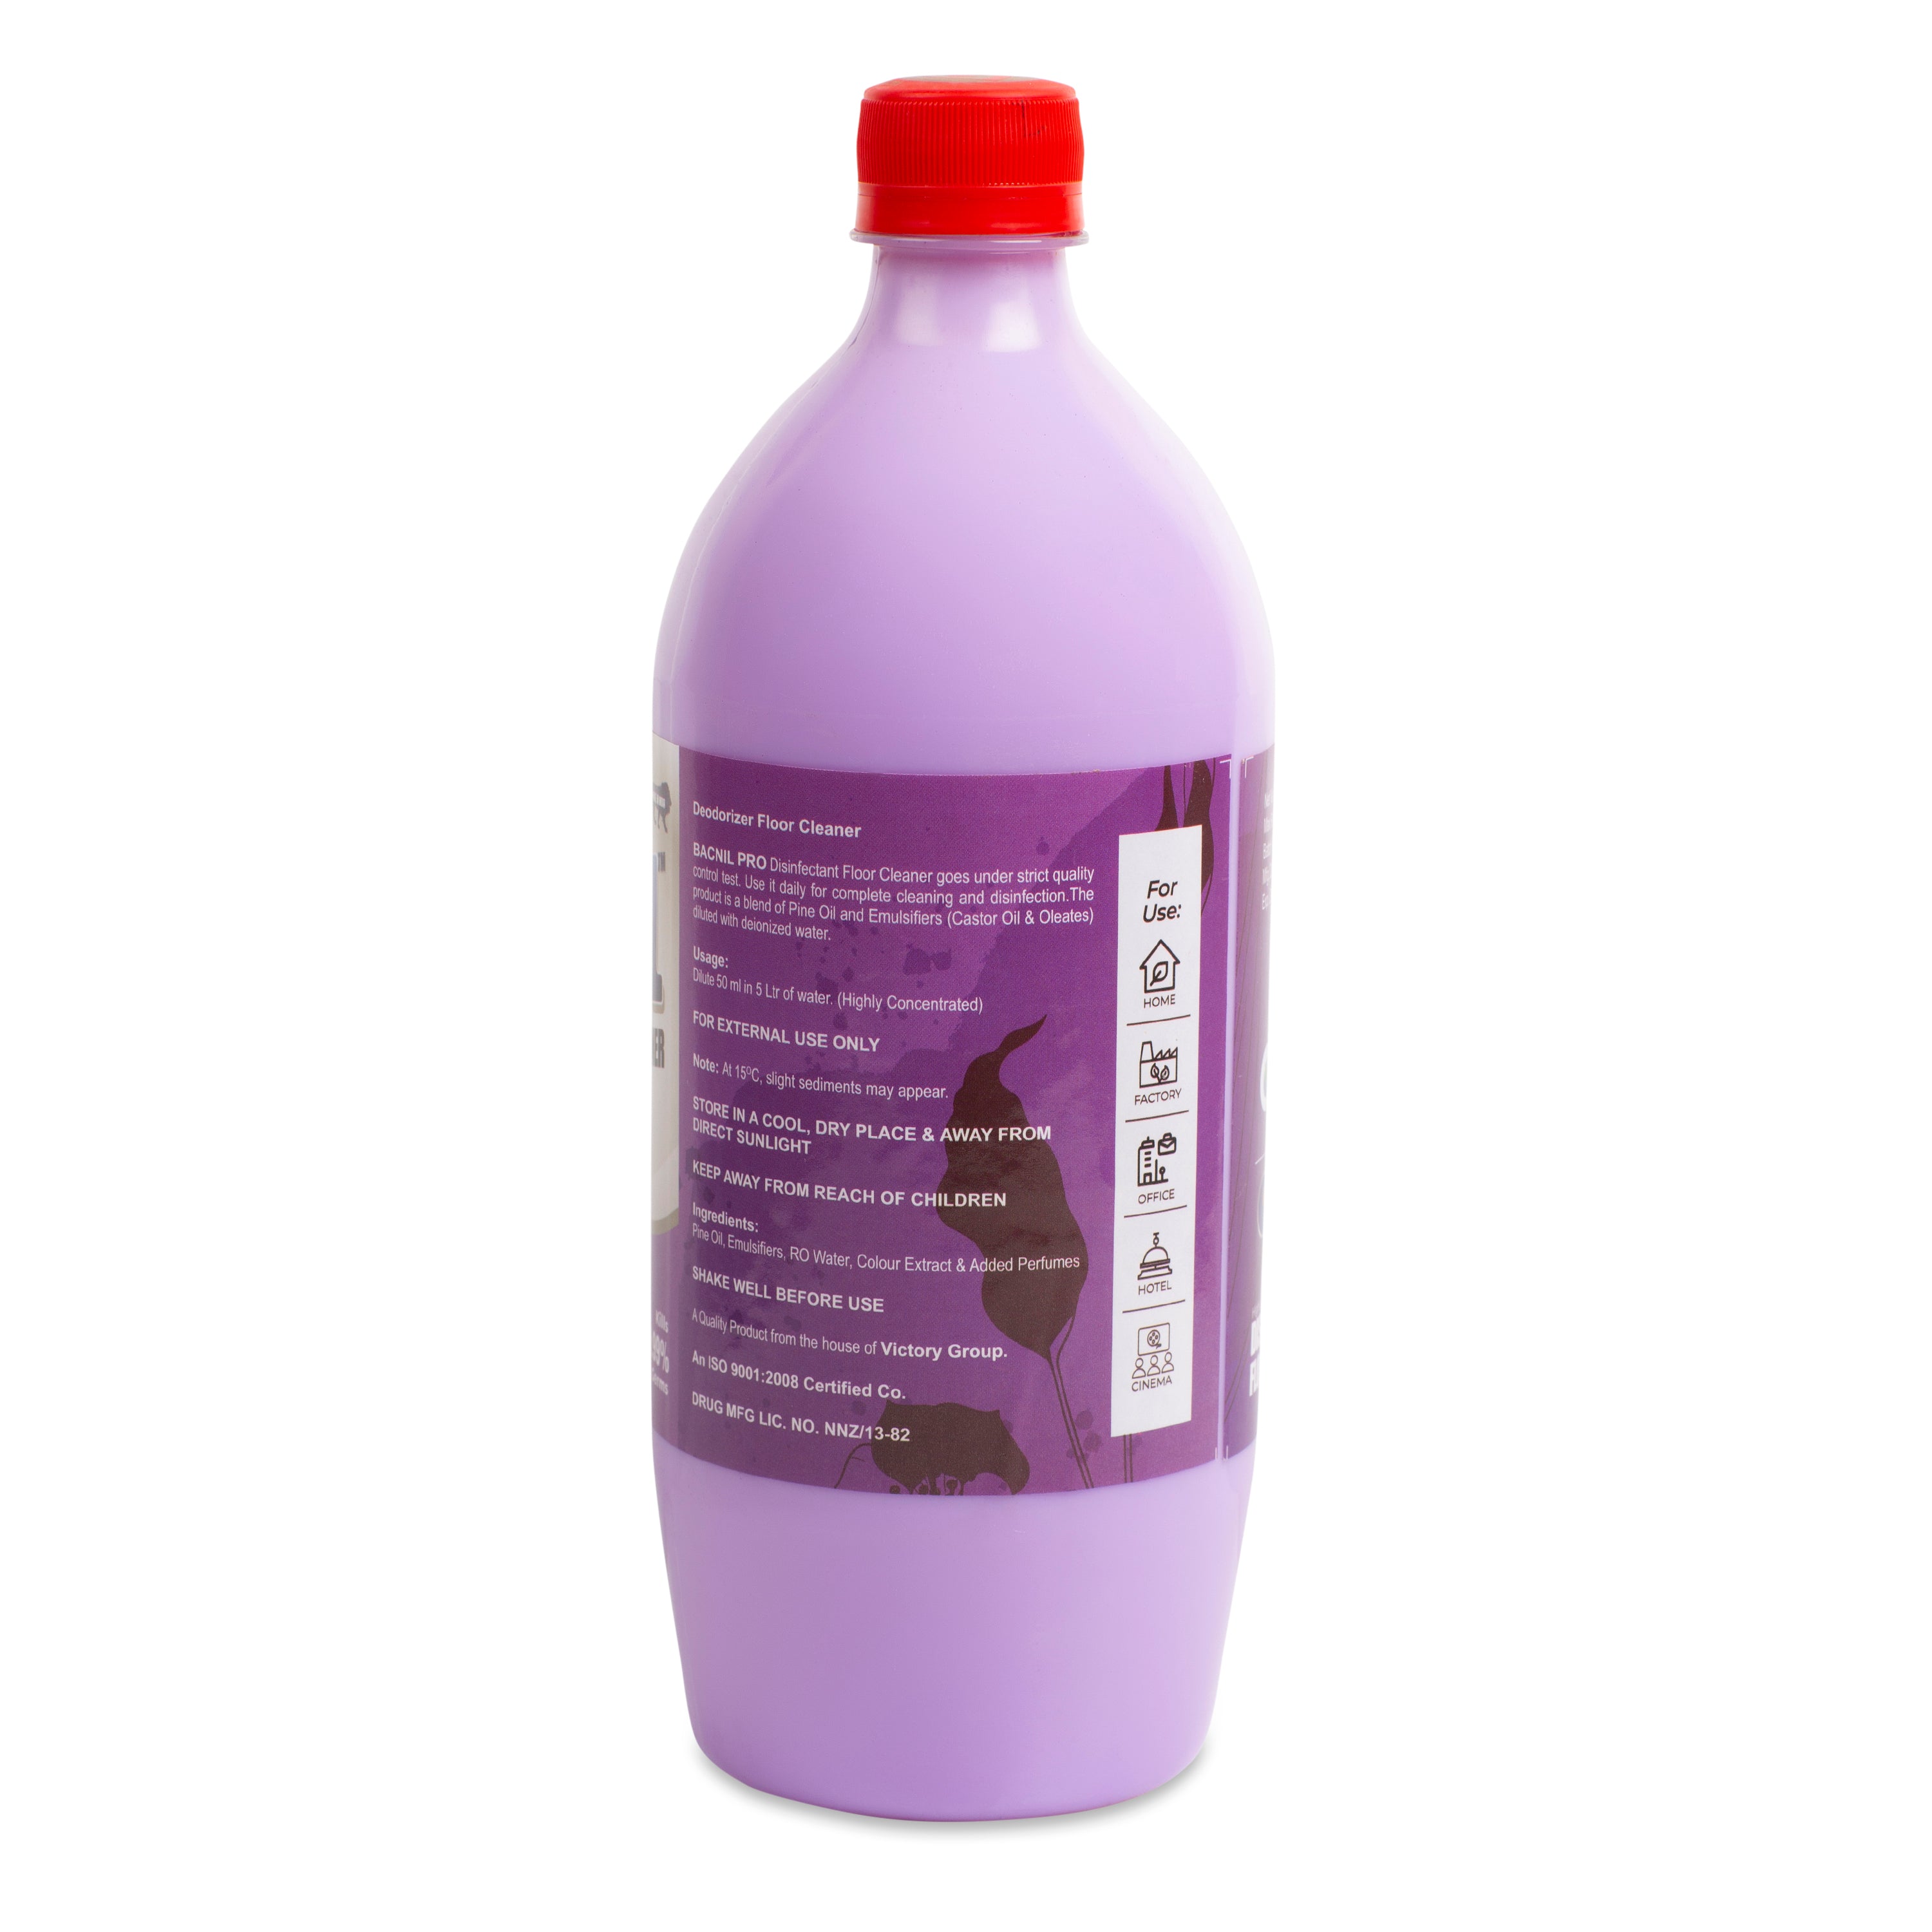 Bacnil pro disinfectant surface cleaner